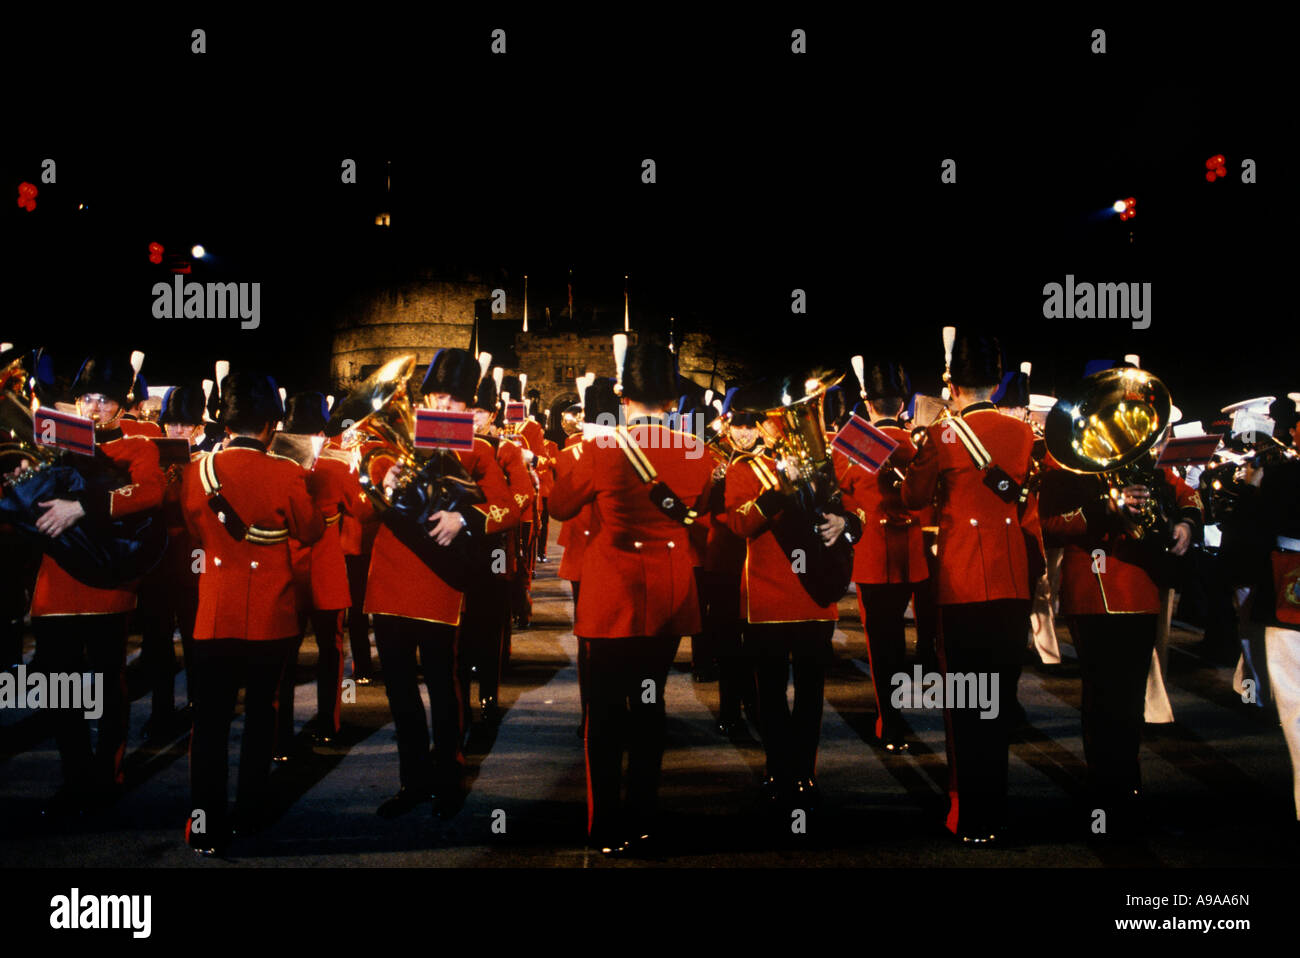 Ten facts you never knew about the Royal Edinburgh Military Tattoo